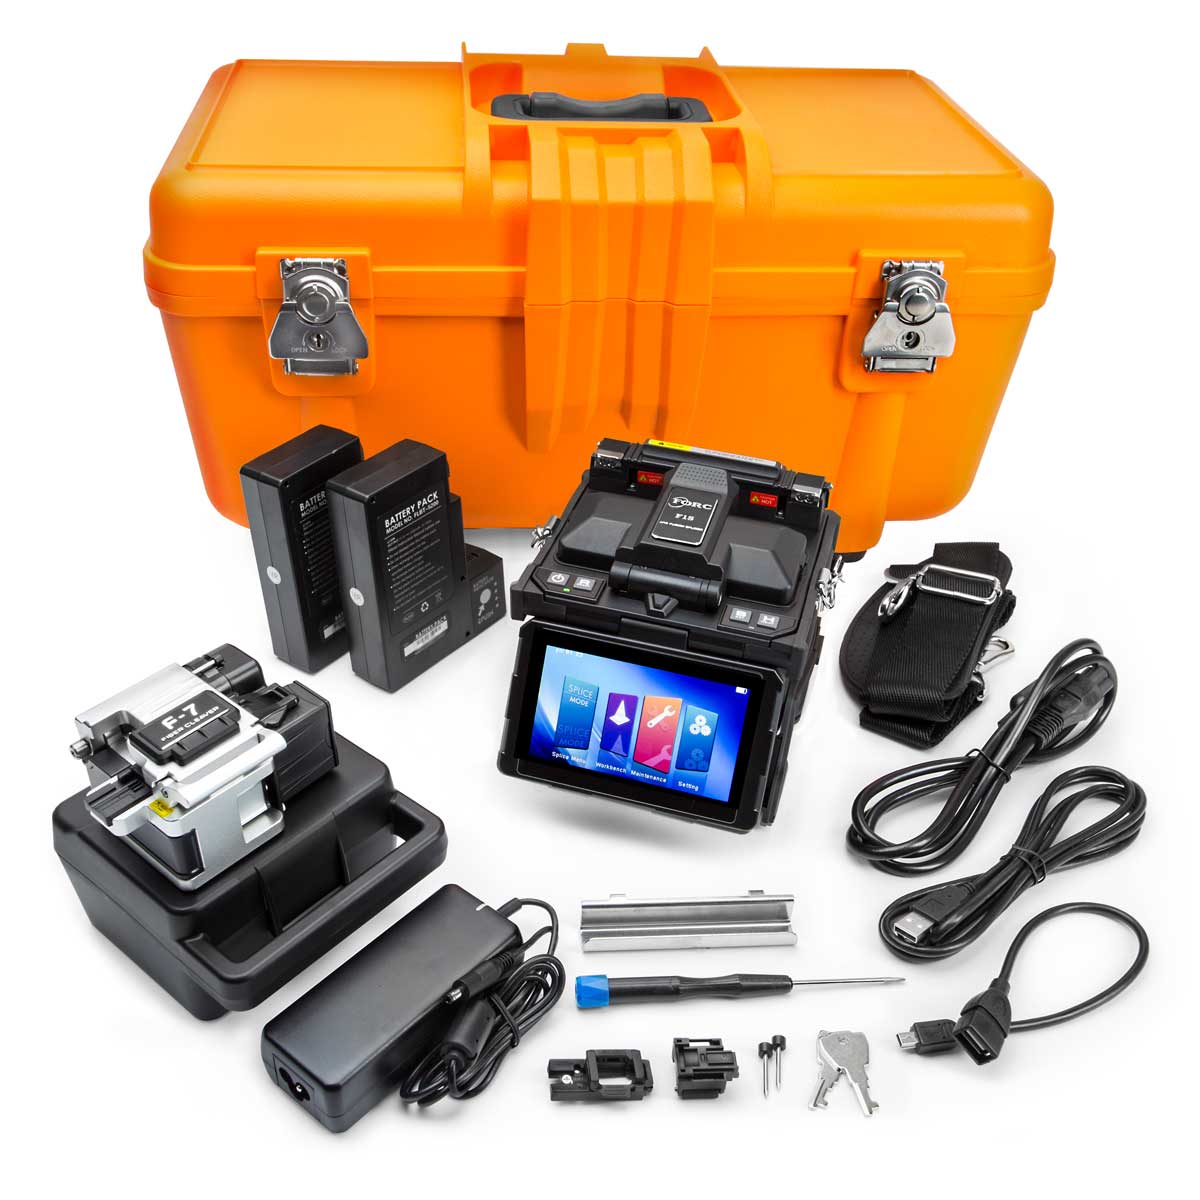 FORC F1S Clad Alignment Splicer Kit